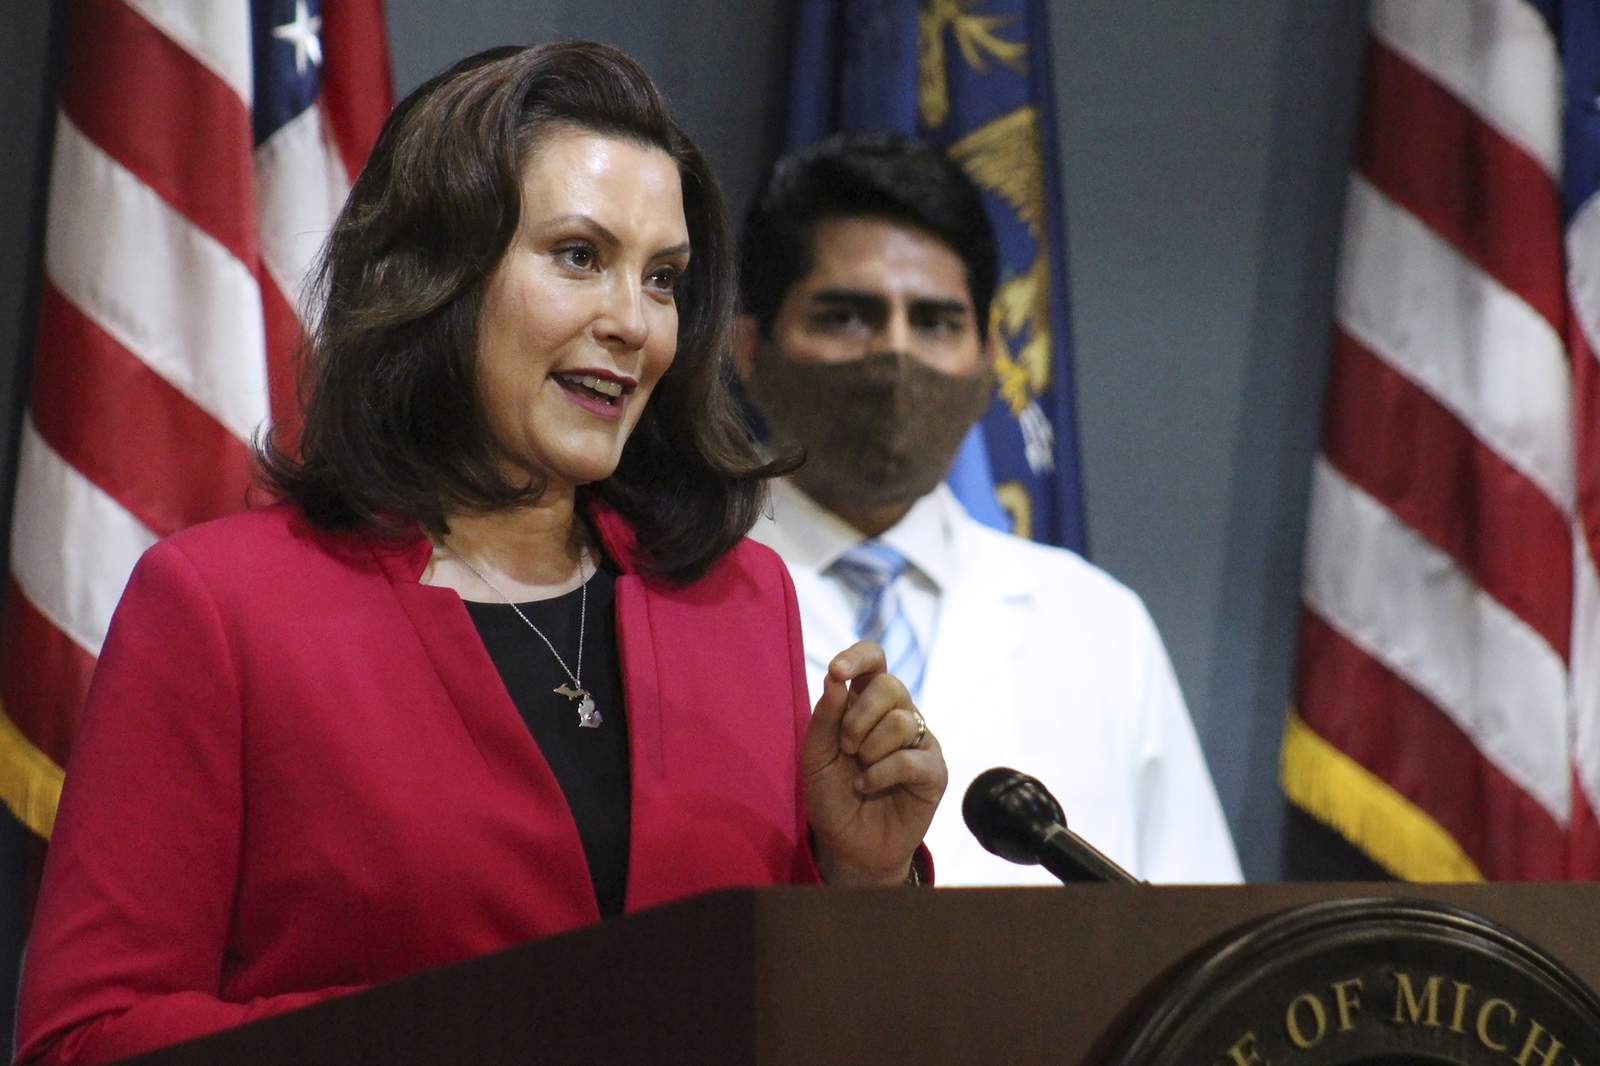 Group tops 400K signatures to repeal Michigan Gov. Whitmer’s virus powers